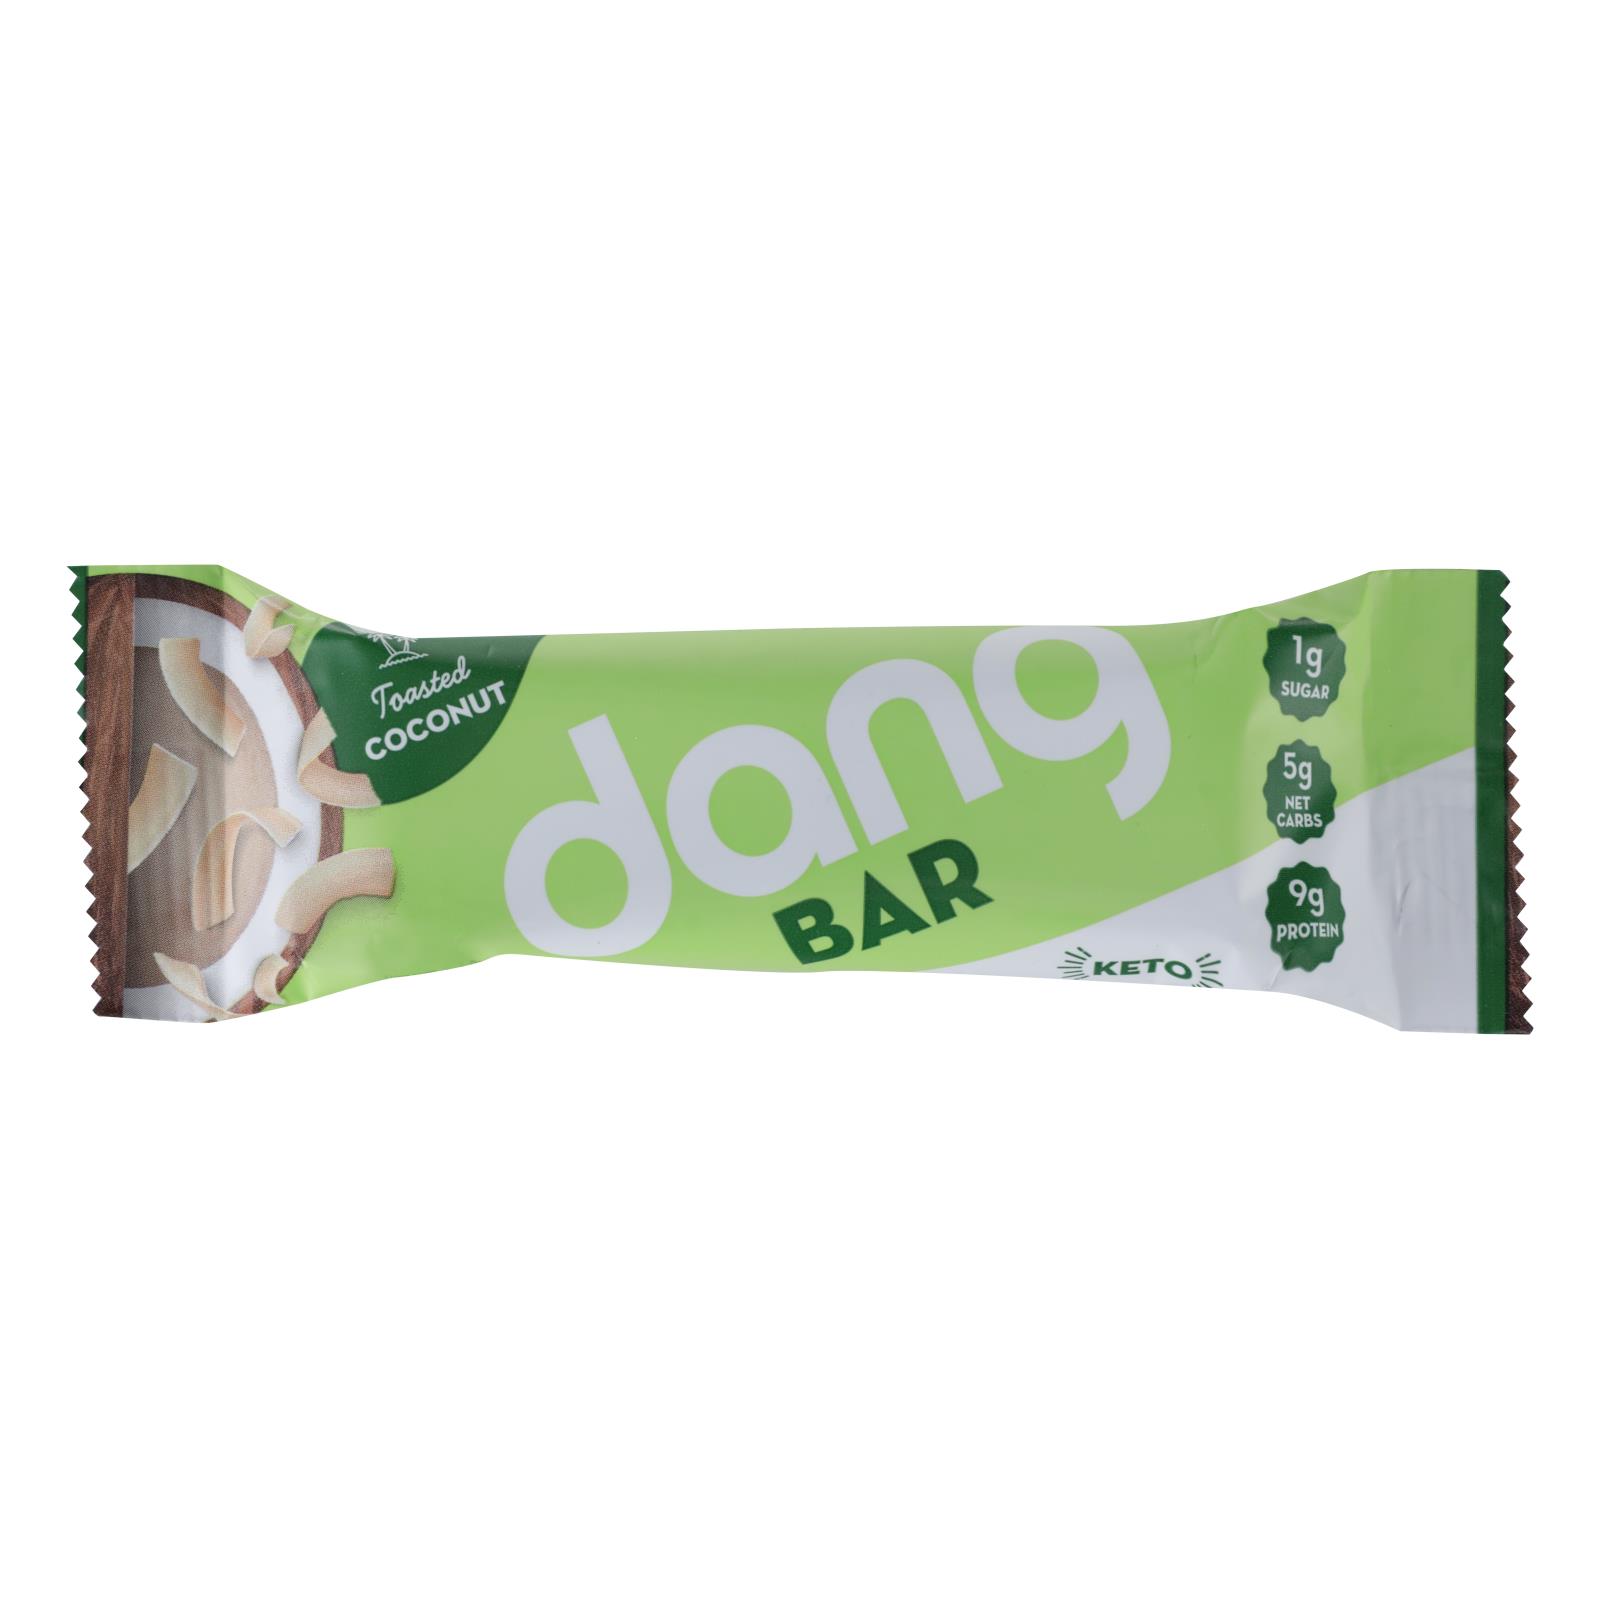 Dang - Bar Toasted Coconut - Case of 12 - 1.4 OZ